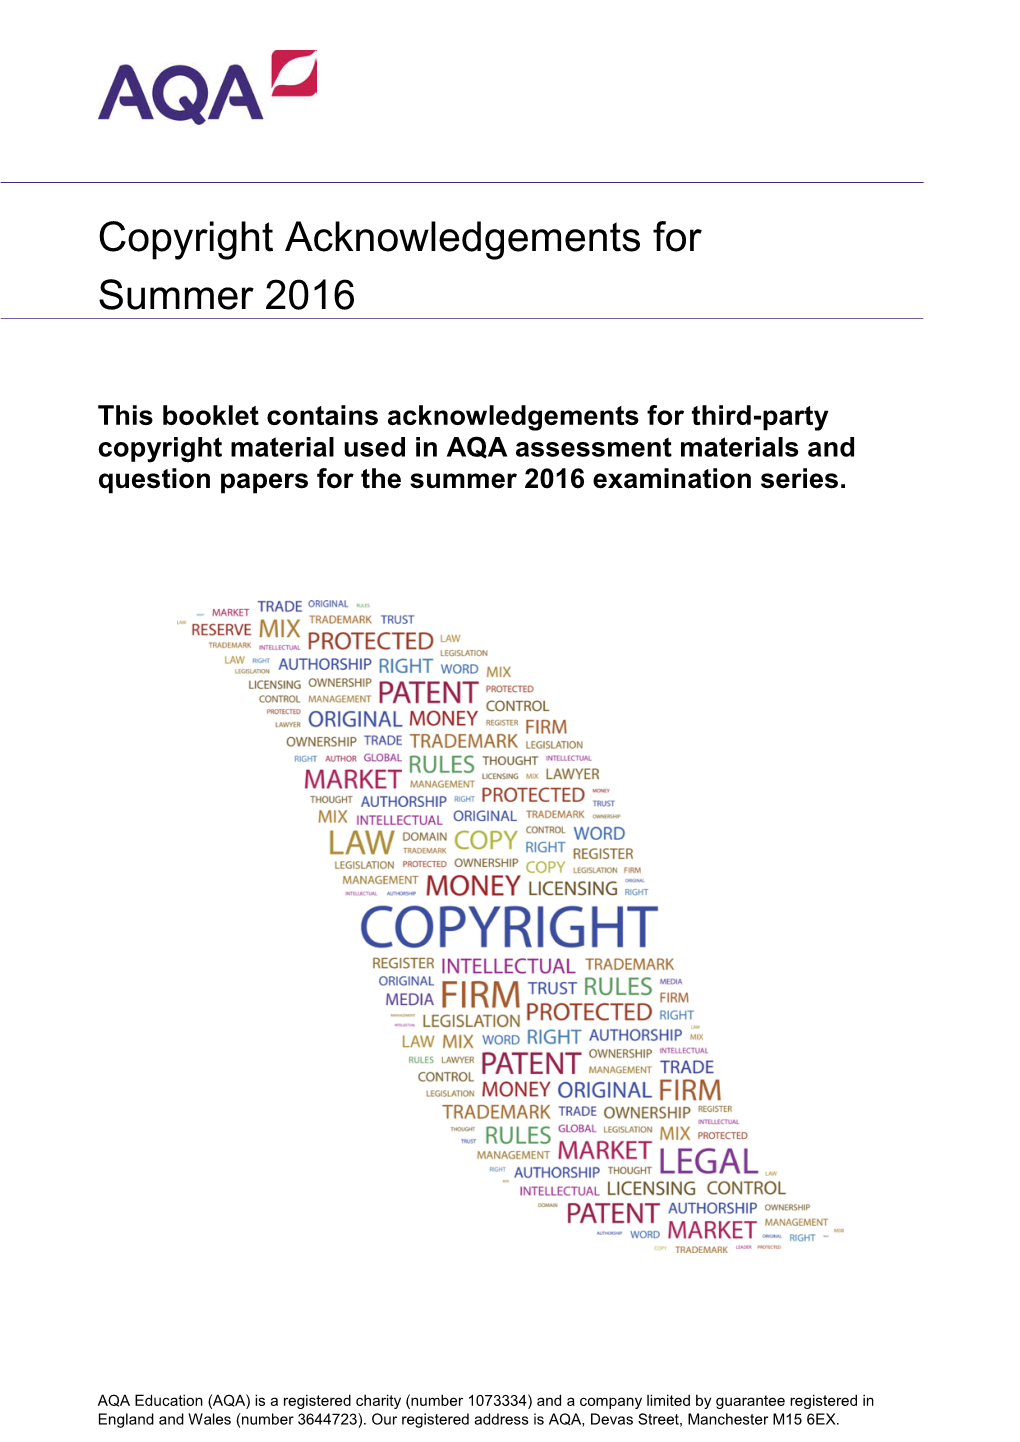 Copyright Acknowledgements for Summer 2016